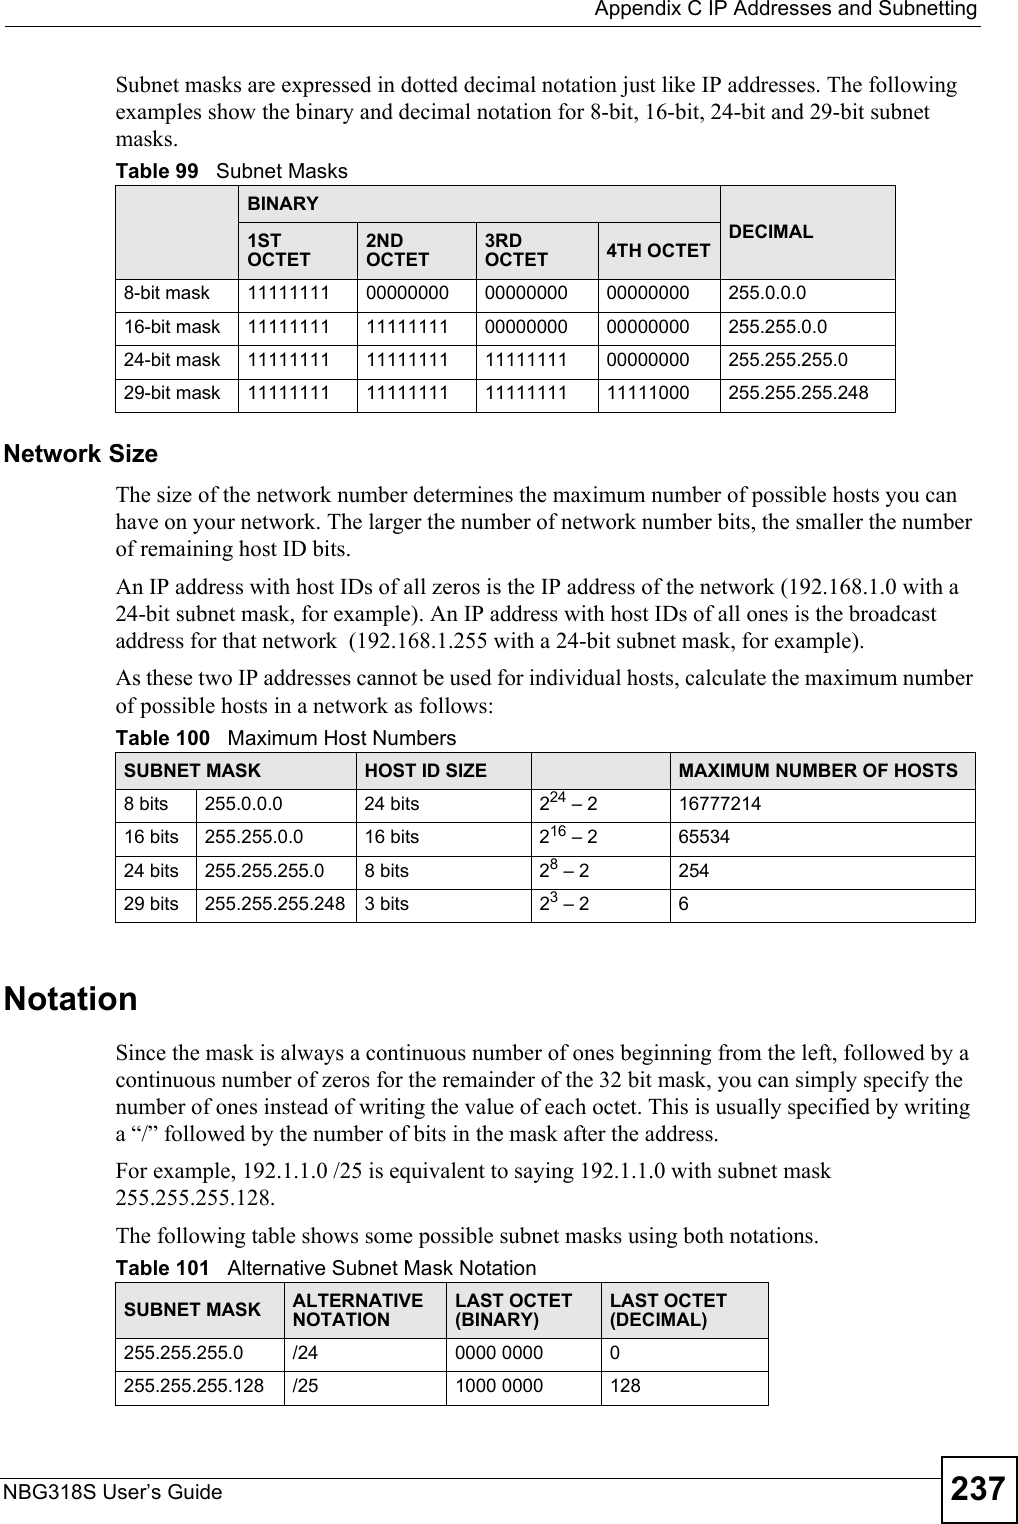  Appendix C IP Addresses and SubnettingNBG318S User’s Guide 237Subnet masks are expressed in dotted decimal notation just like IP addresses. The following examples show the binary and decimal notation for 8-bit, 16-bit, 24-bit and 29-bit subnet masks. Network SizeThe size of the network number determines the maximum number of possible hosts you can have on your network. The larger the number of network number bits, the smaller the number of remaining host ID bits. An IP address with host IDs of all zeros is the IP address of the network (192.168.1.0 with a 24-bit subnet mask, for example). An IP address with host IDs of all ones is the broadcast address for that network  (192.168.1.255 with a 24-bit subnet mask, for example).As these two IP addresses cannot be used for individual hosts, calculate the maximum number of possible hosts in a network as follows:NotationSince the mask is always a continuous number of ones beginning from the left, followed by a continuous number of zeros for the remainder of the 32 bit mask, you can simply specify the number of ones instead of writing the value of each octet. This is usually specified by writing a “/” followed by the number of bits in the mask after the address. For example, 192.1.1.0 /25 is equivalent to saying 192.1.1.0 with subnet mask 255.255.255.128. The following table shows some possible subnet masks using both notations. Table 99   Subnet MasksBINARYDECIMAL1ST OCTET2ND OCTET3RD OCTET 4TH OCTET8-bit mask 11111111 00000000 00000000 00000000 255.0.0.016-bit mask 11111111 11111111 00000000 00000000 255.255.0.024-bit mask 11111111 11111111 11111111 00000000 255.255.255.029-bit mask 11111111 11111111 11111111 11111000 255.255.255.248Table 100   Maximum Host NumbersSUBNET MASK HOST ID SIZE MAXIMUM NUMBER OF HOSTS8 bits 255.0.0.0 24 bits 224 – 2 1677721416 bits 255.255.0.0 16 bits 216 – 2 6553424 bits 255.255.255.0 8 bits 28 – 2 25429 bits 255.255.255.248 3 bits 23 – 2 6Table 101   Alternative Subnet Mask NotationSUBNET MASK ALTERNATIVE NOTATIONLAST OCTET (BINARY)LAST OCTET (DECIMAL)255.255.255.0 /24 0000 0000 0255.255.255.128 /25 1000 0000 128